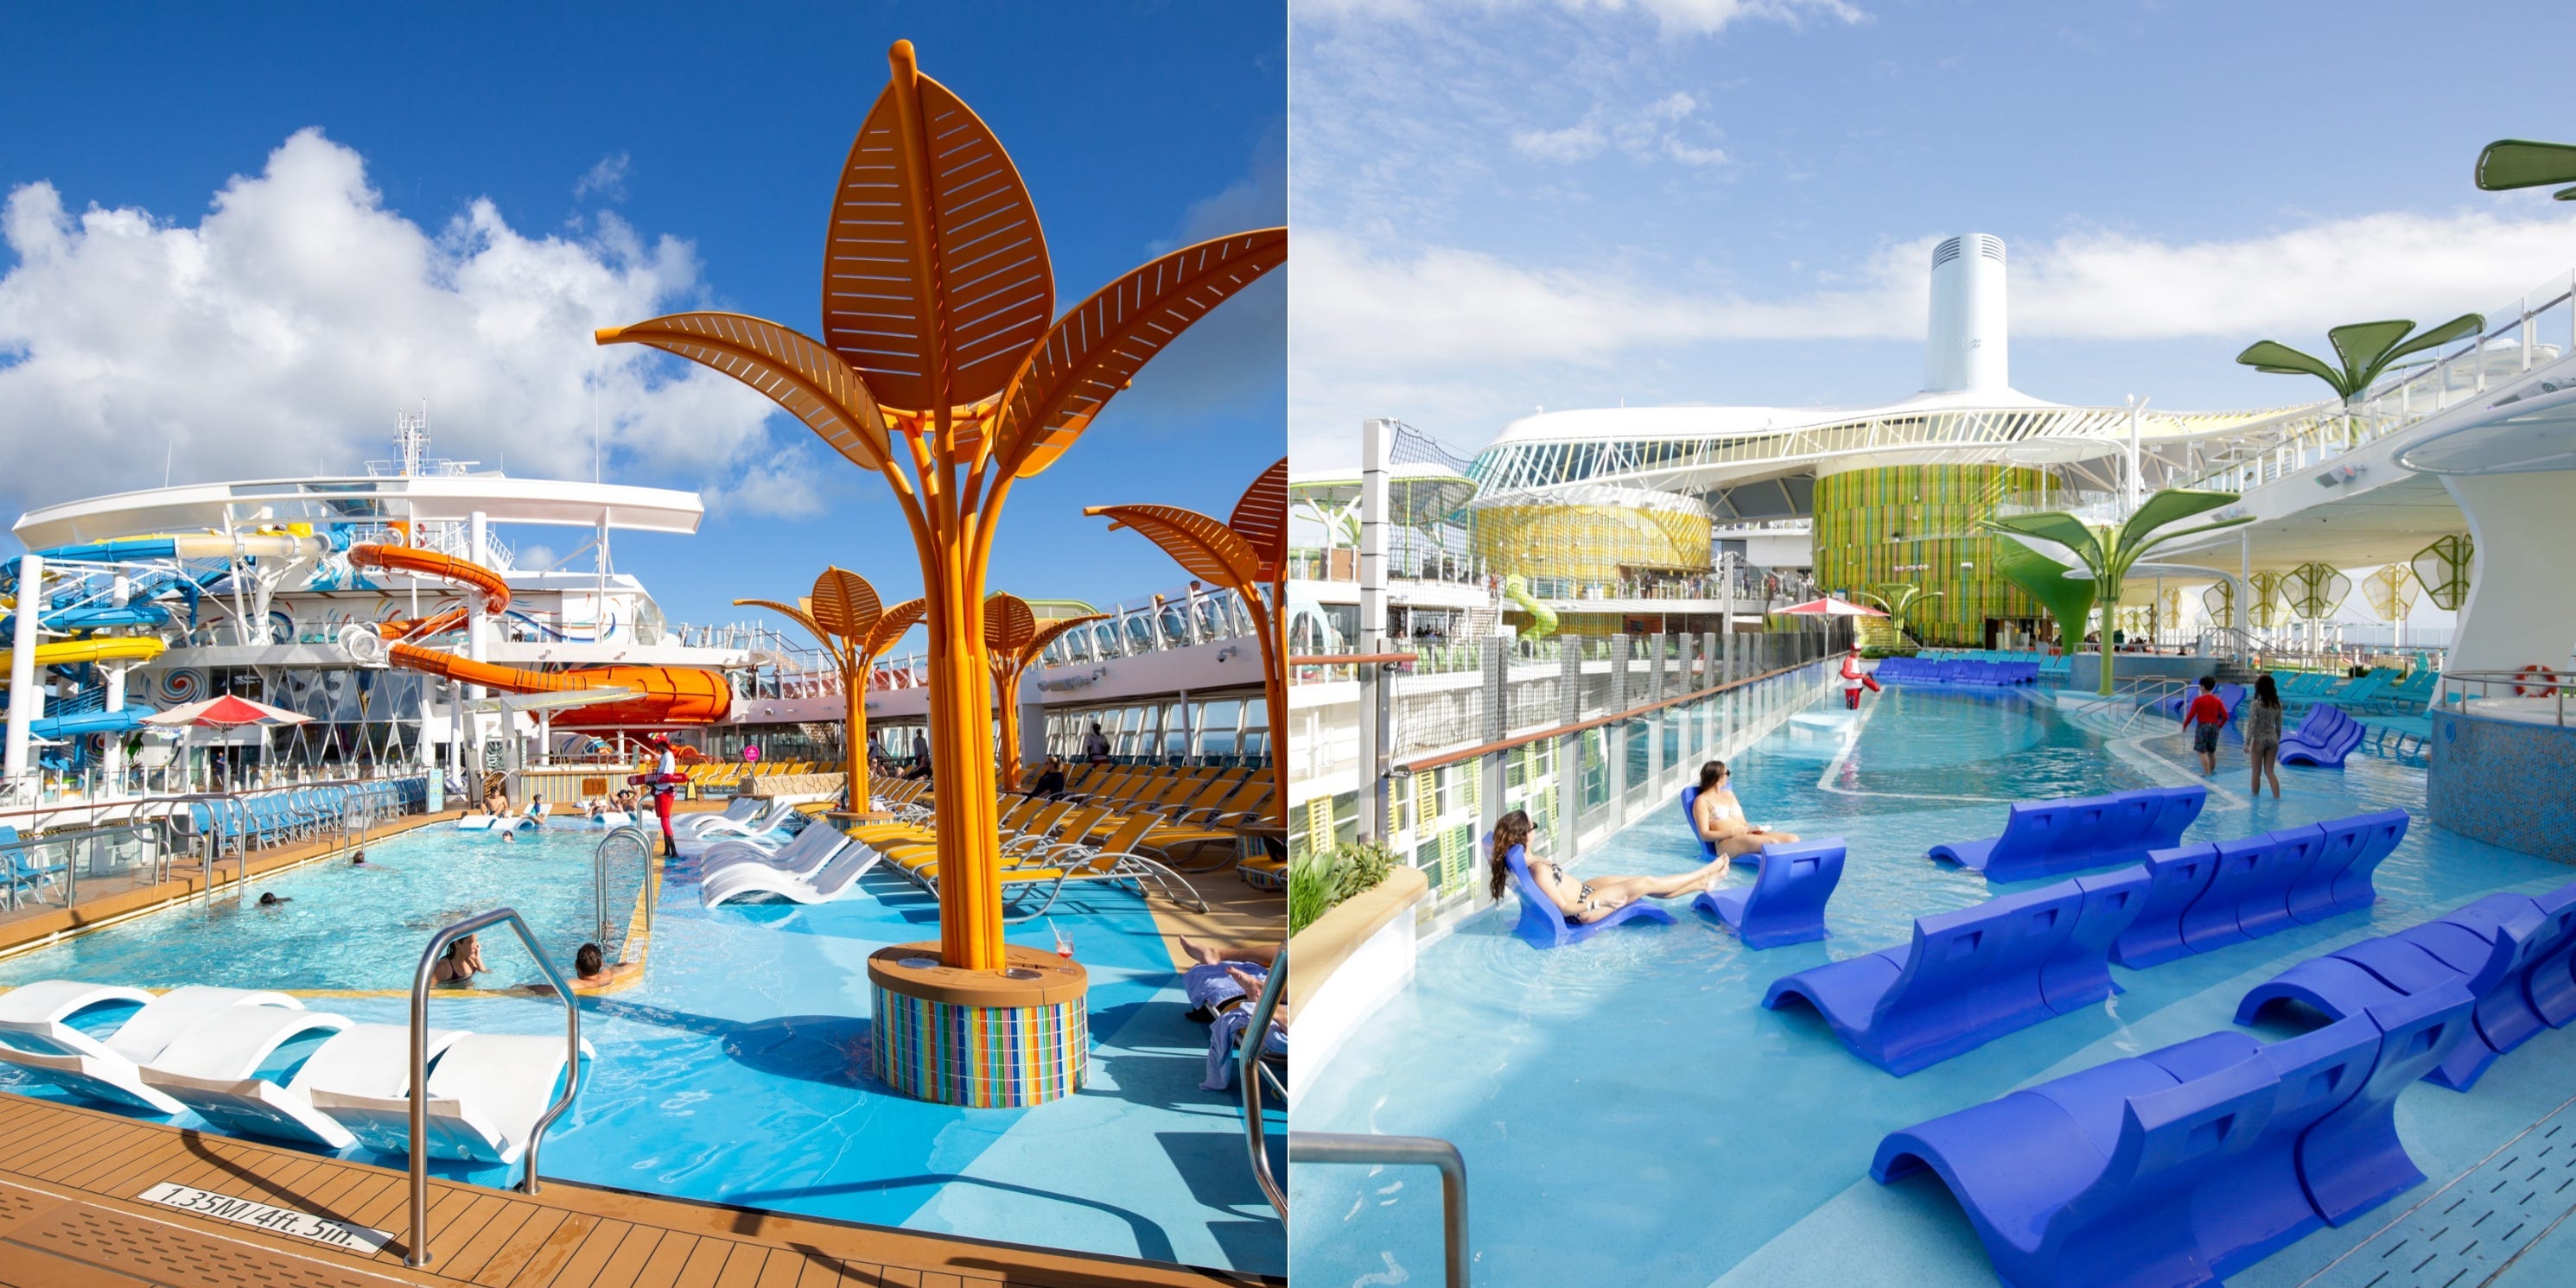 <p>Wonder has three waterslides. Icon has a six-slide waterpark complete with rafting and racing options.</p><p>Both have increasingly popular cruise amenities like decks-long dry slides, mini-golf courses, rock climbing walls, and playgrounds.</p><p>But instead of <a href="https://www.businessinsider.com/favorite-amenities-royal-caribbean-wonder-of-the-seas-cruise-2023-1">Wonder of the Seas' zipline</a>, Icon of the Seas has Crown's Edge, a thrilling agility course with a small zipline that leaves travelers dangling 154 feet above the ocean.</p>